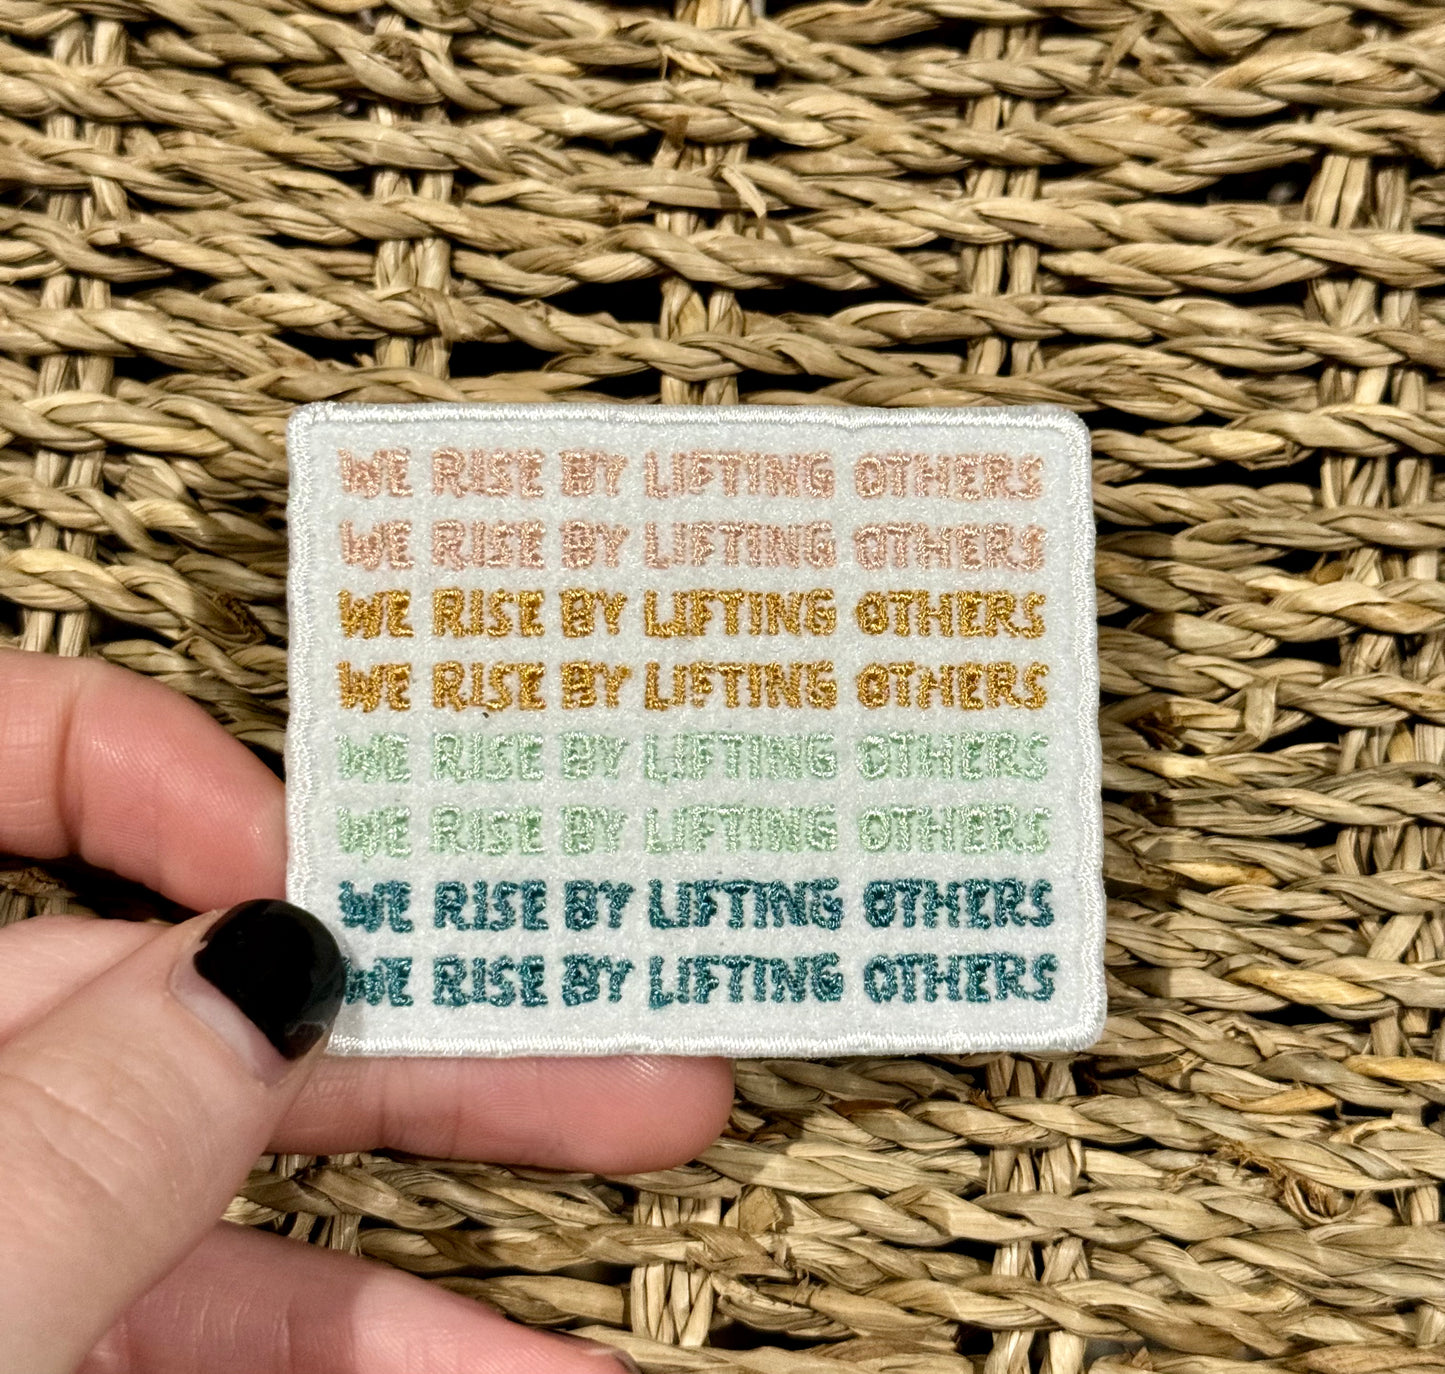 We Rise By Lifting Others Patch